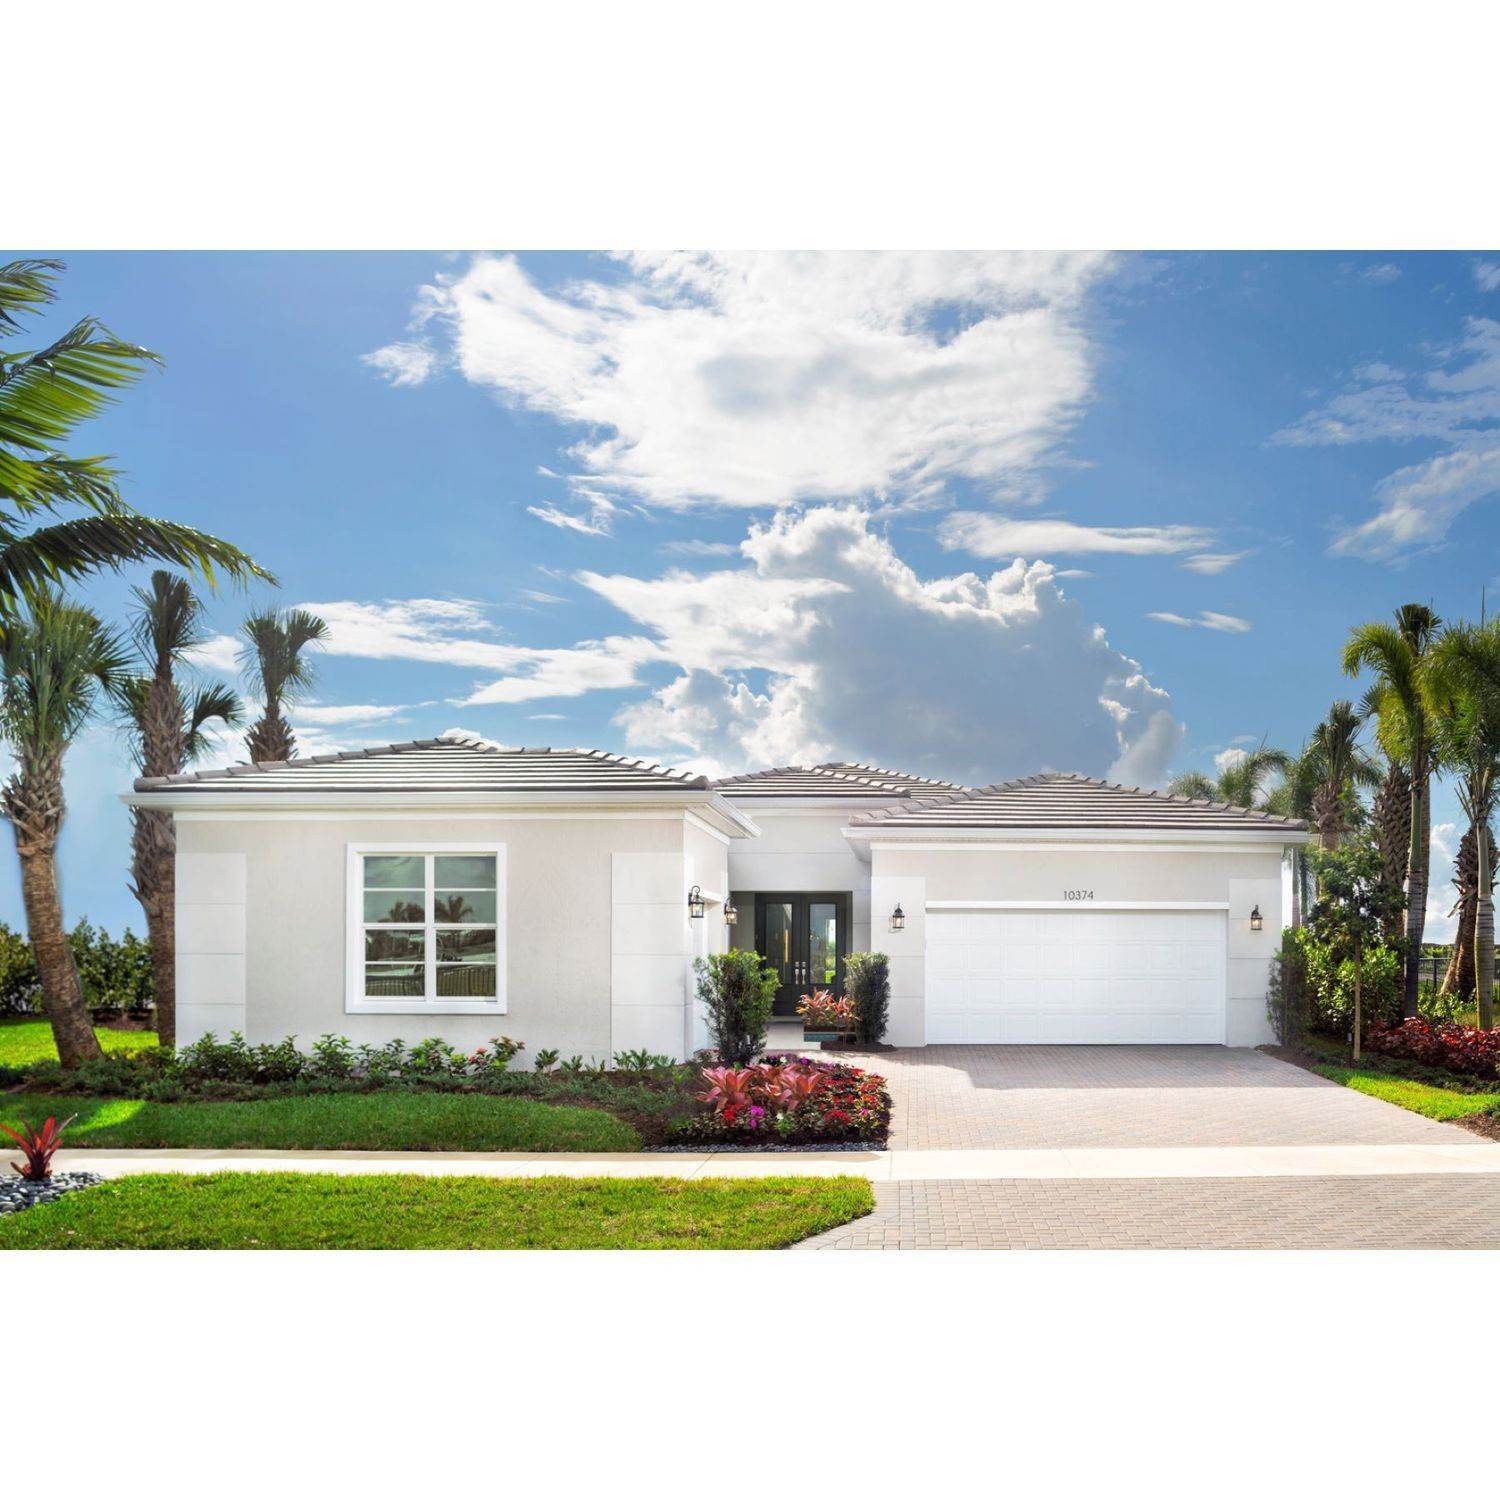 9. Tradition - Telaro xây dựng tại 11824 SW Antarus Ct, Port St. Lucie, FL 34987